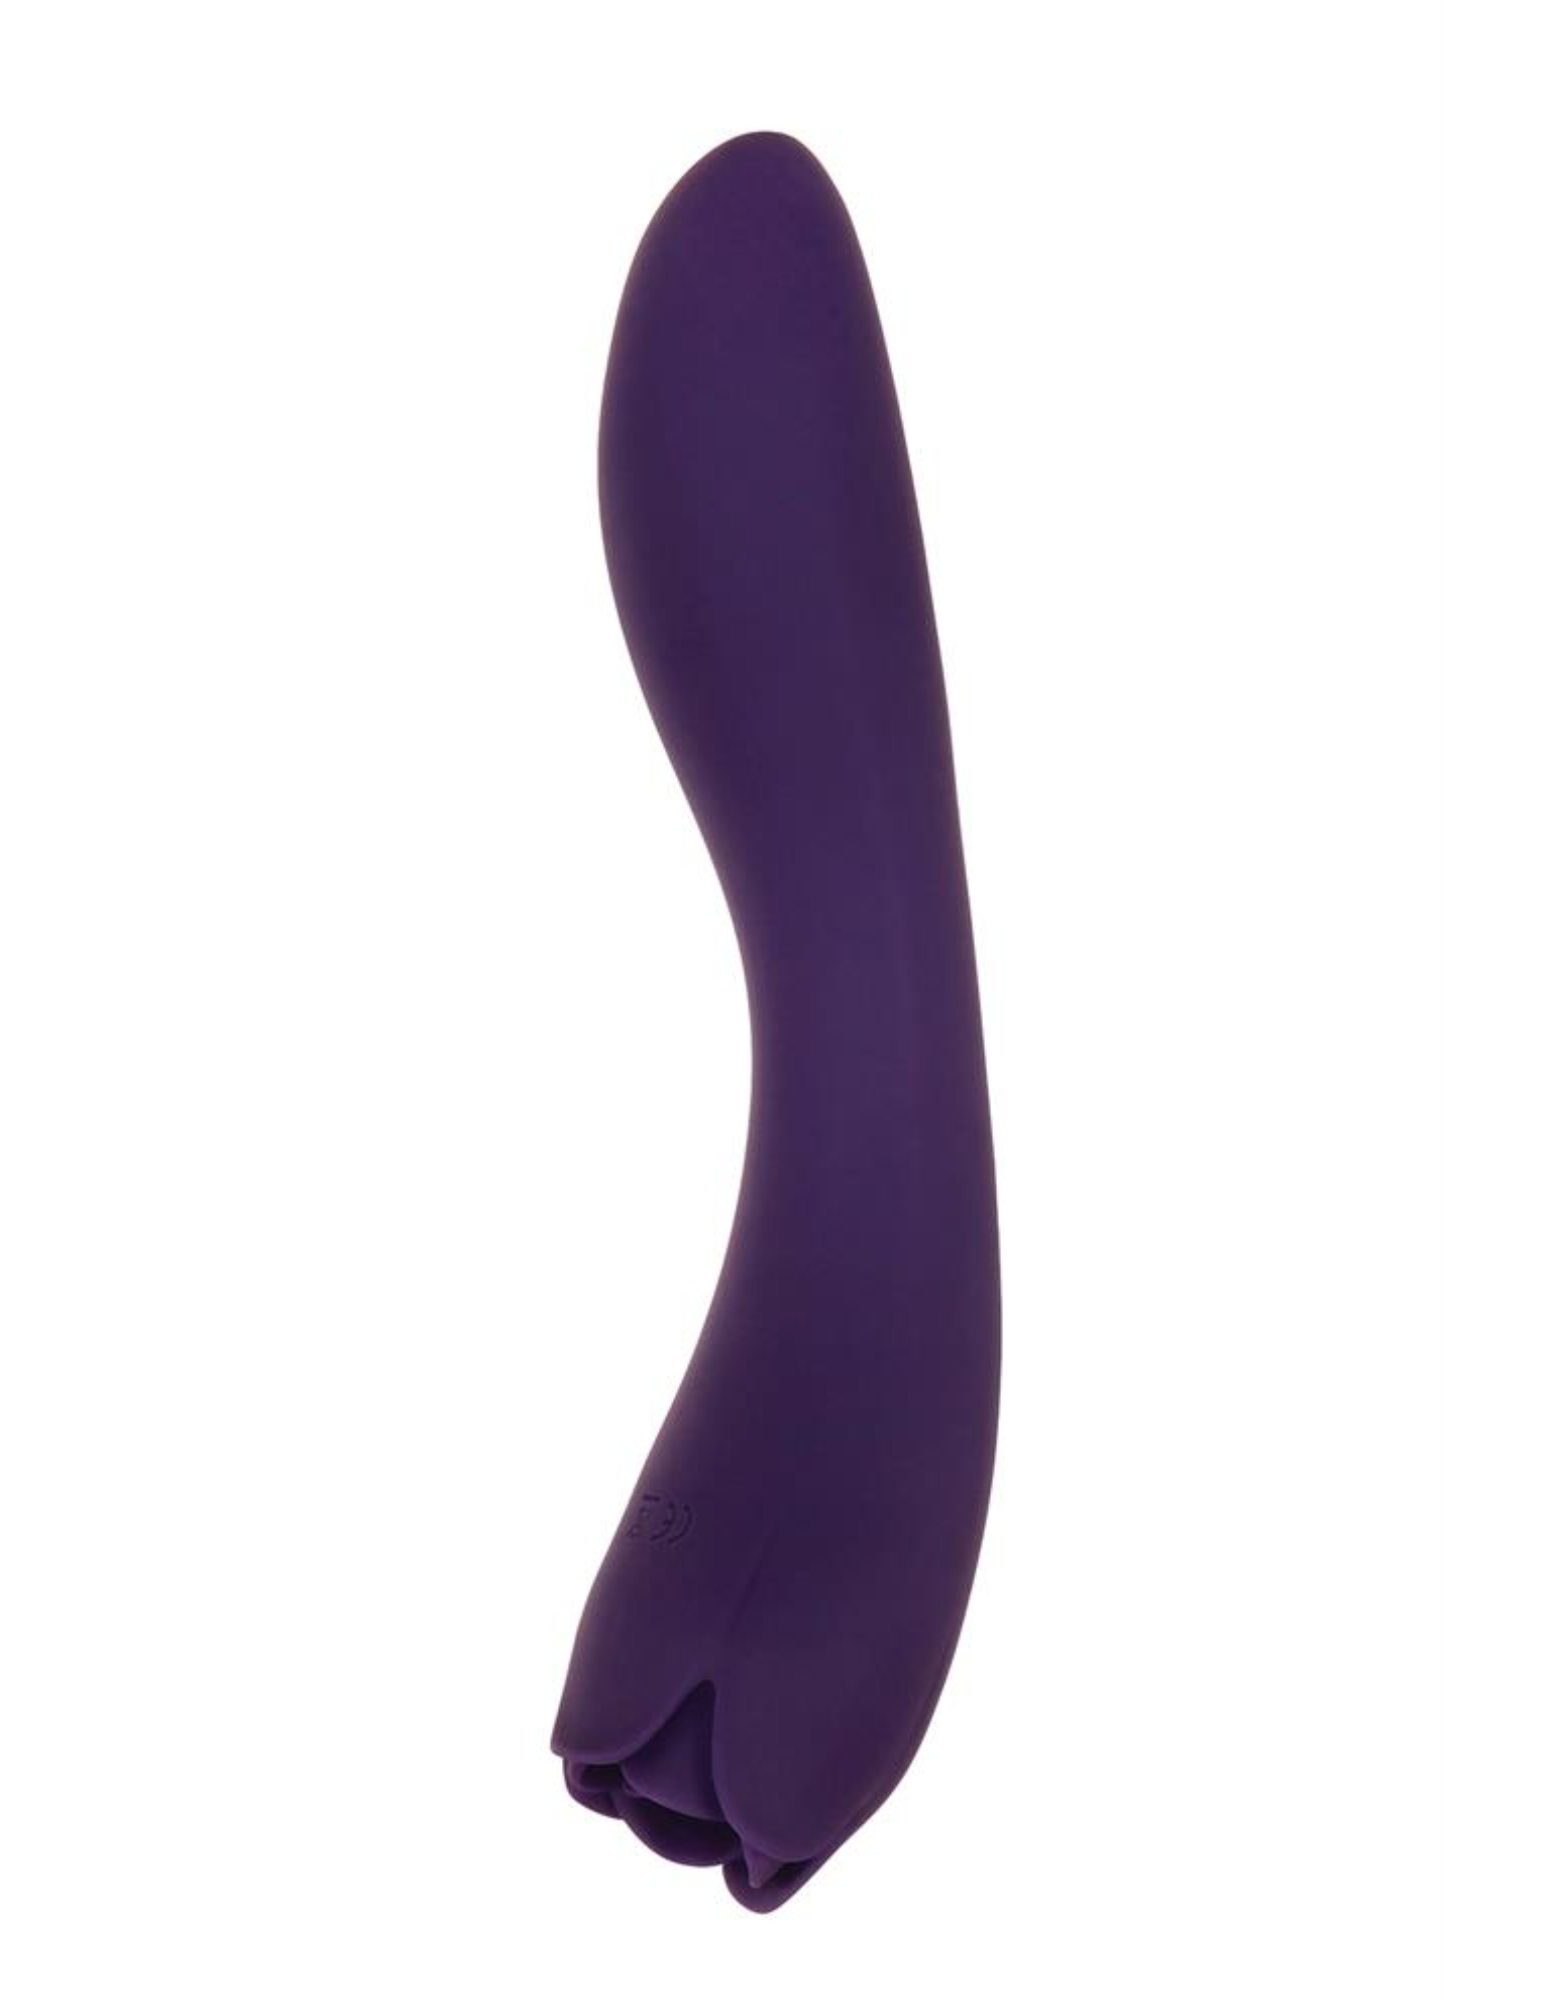 Side view of the Thorny Rose Rechargeable Silicone Dual-Ended Vibrator and Clitoral Flicker from Evolved shows its curved shape and flower petal flickers.